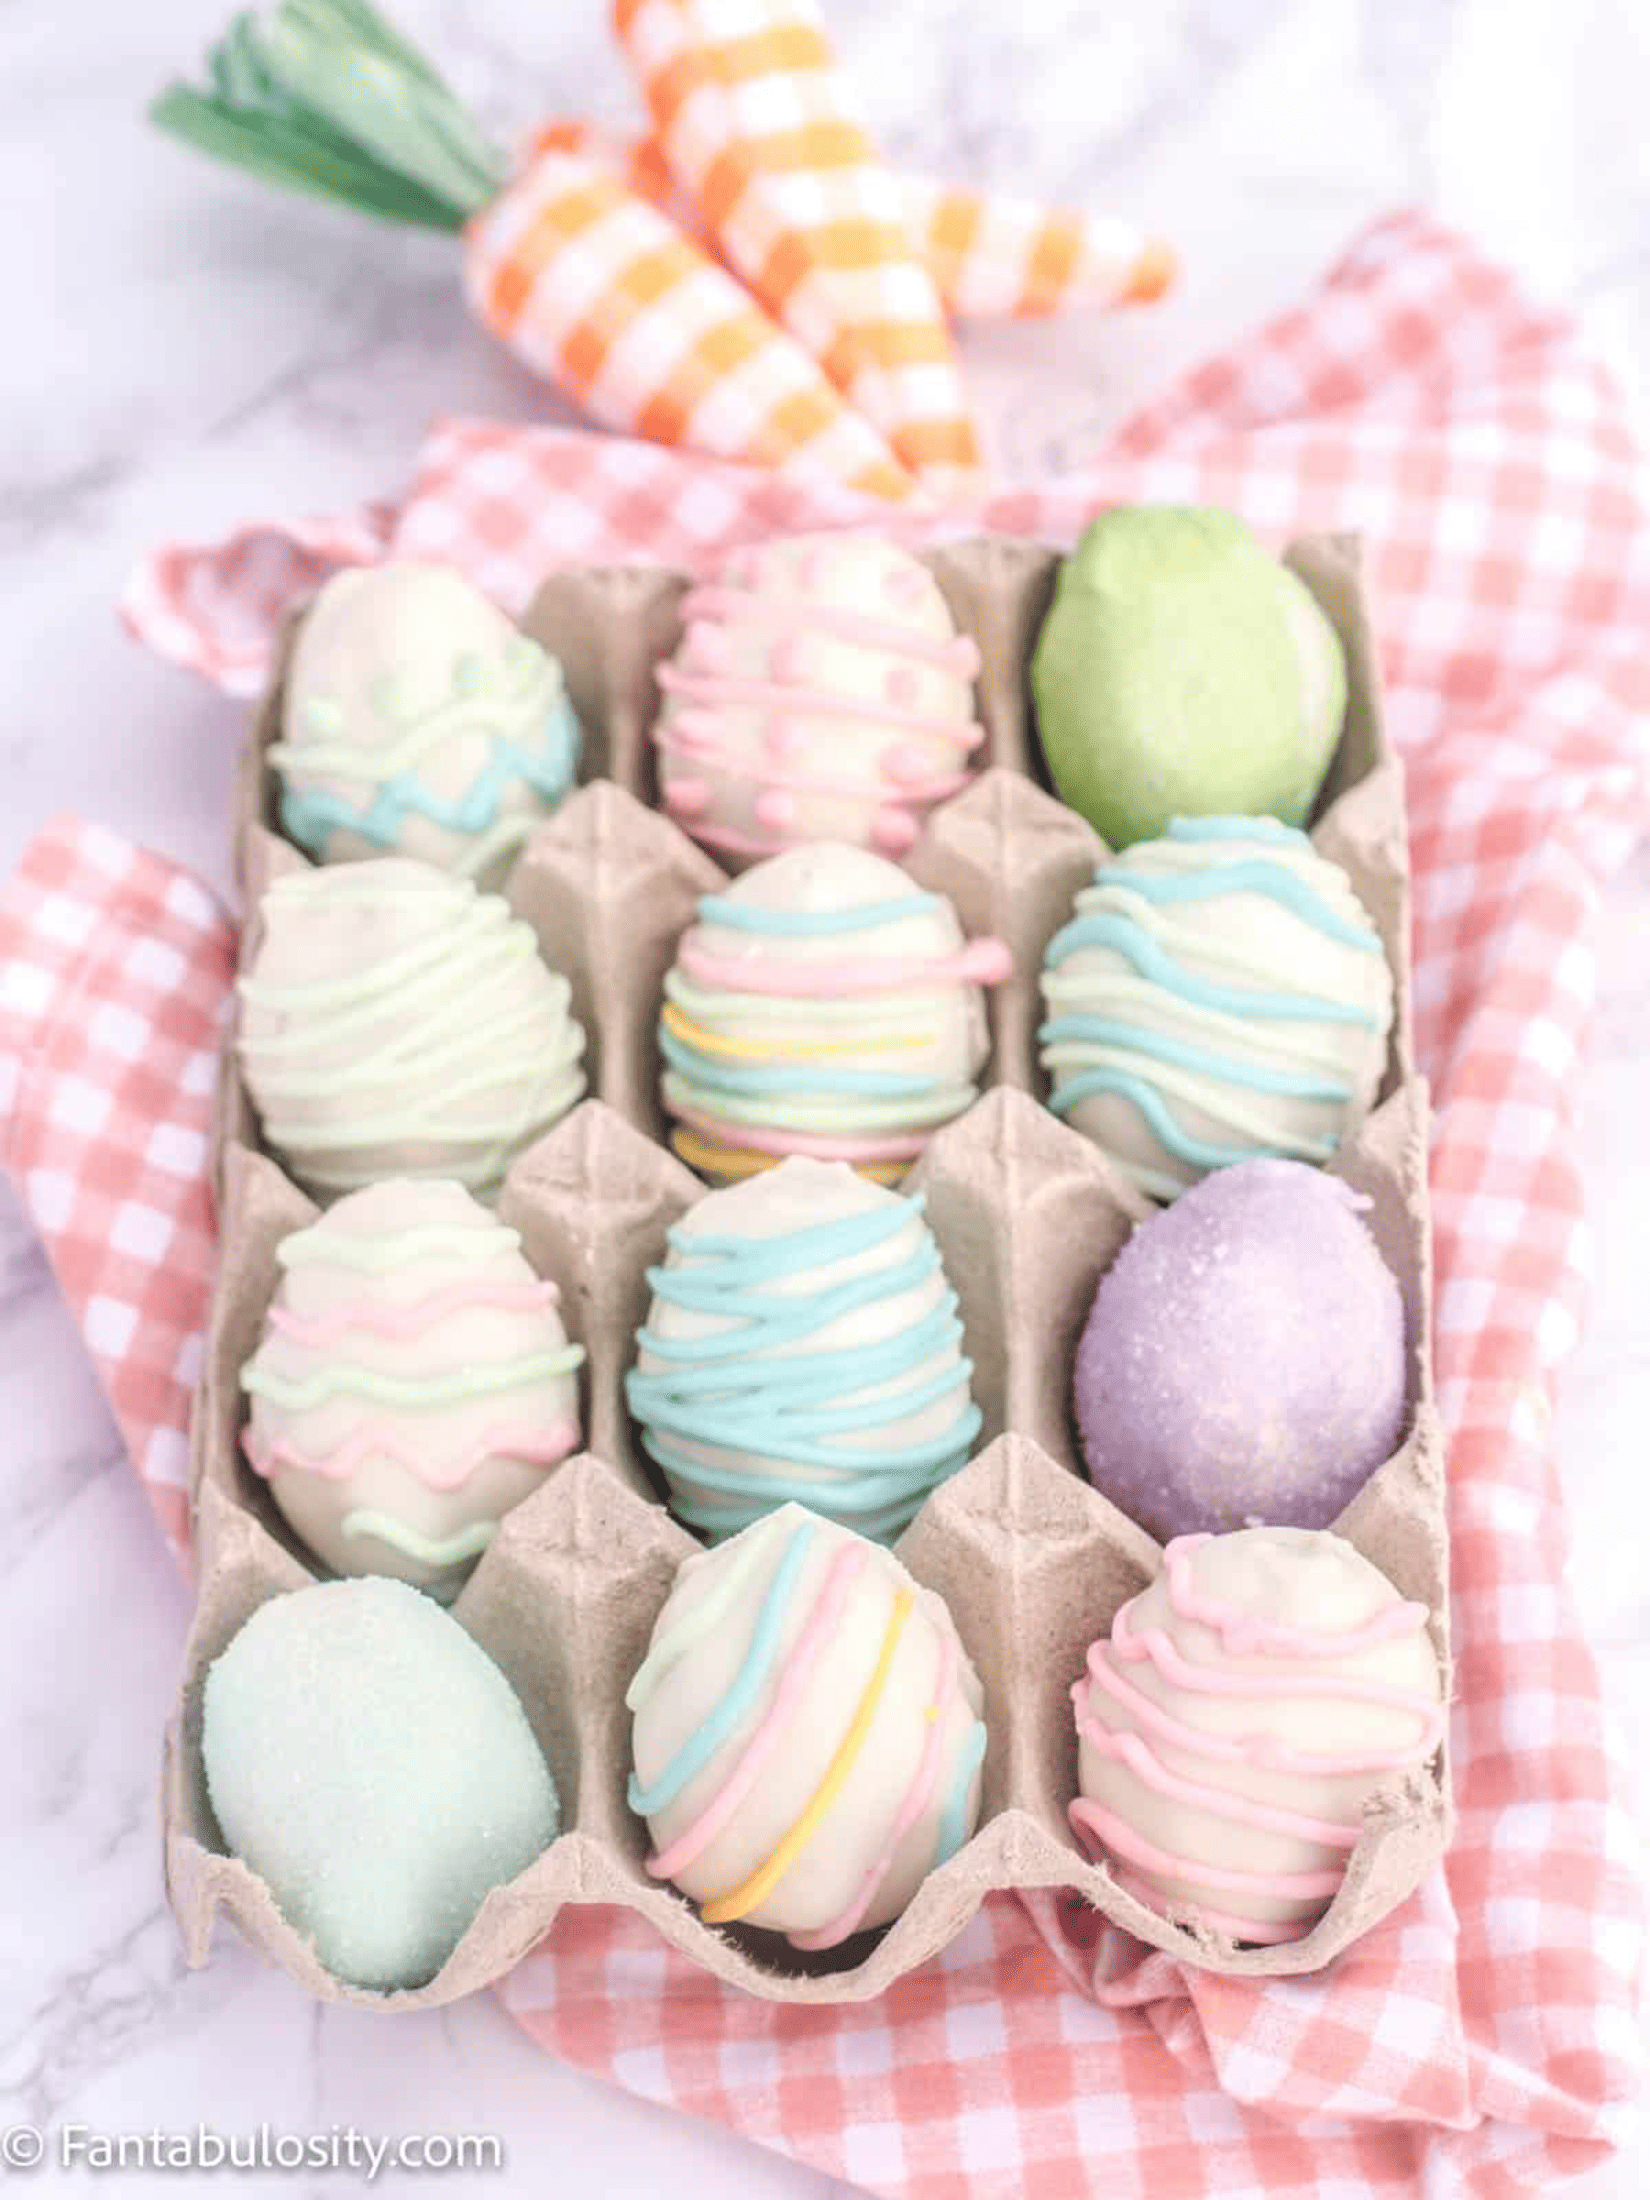 assortment of Easter-themed truffles in pastel colors.